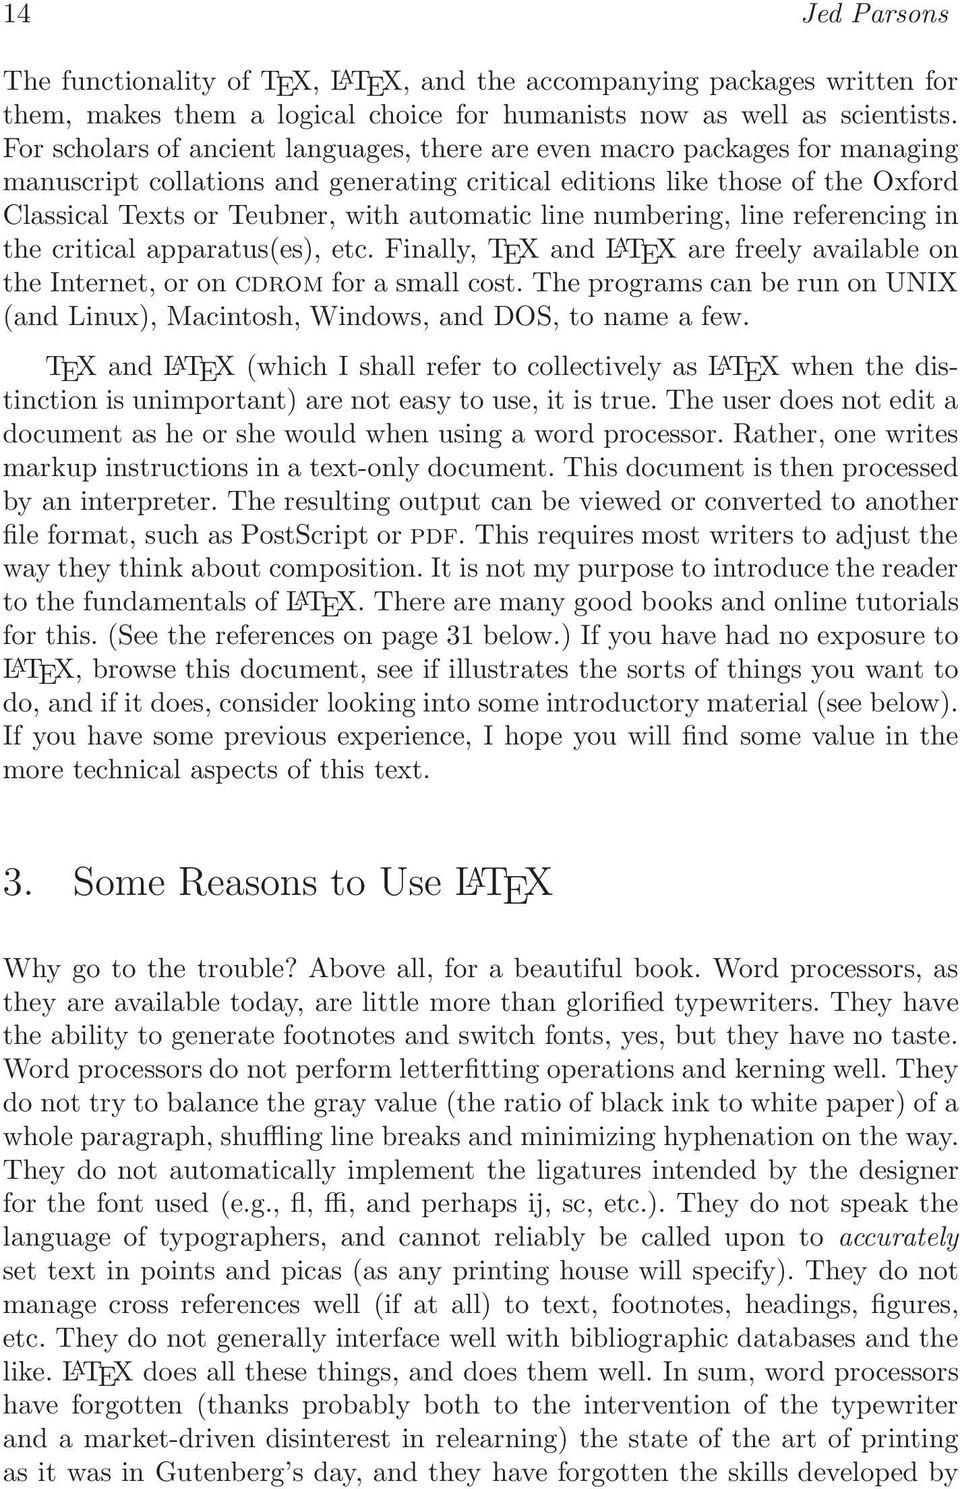 referencing in the critical apparatus(es), etc Finally, TEX and L A TEX are freely available on the Internet, or on cdrom for a small cost The programs can be run on UNIX (and Linux), Macintosh,